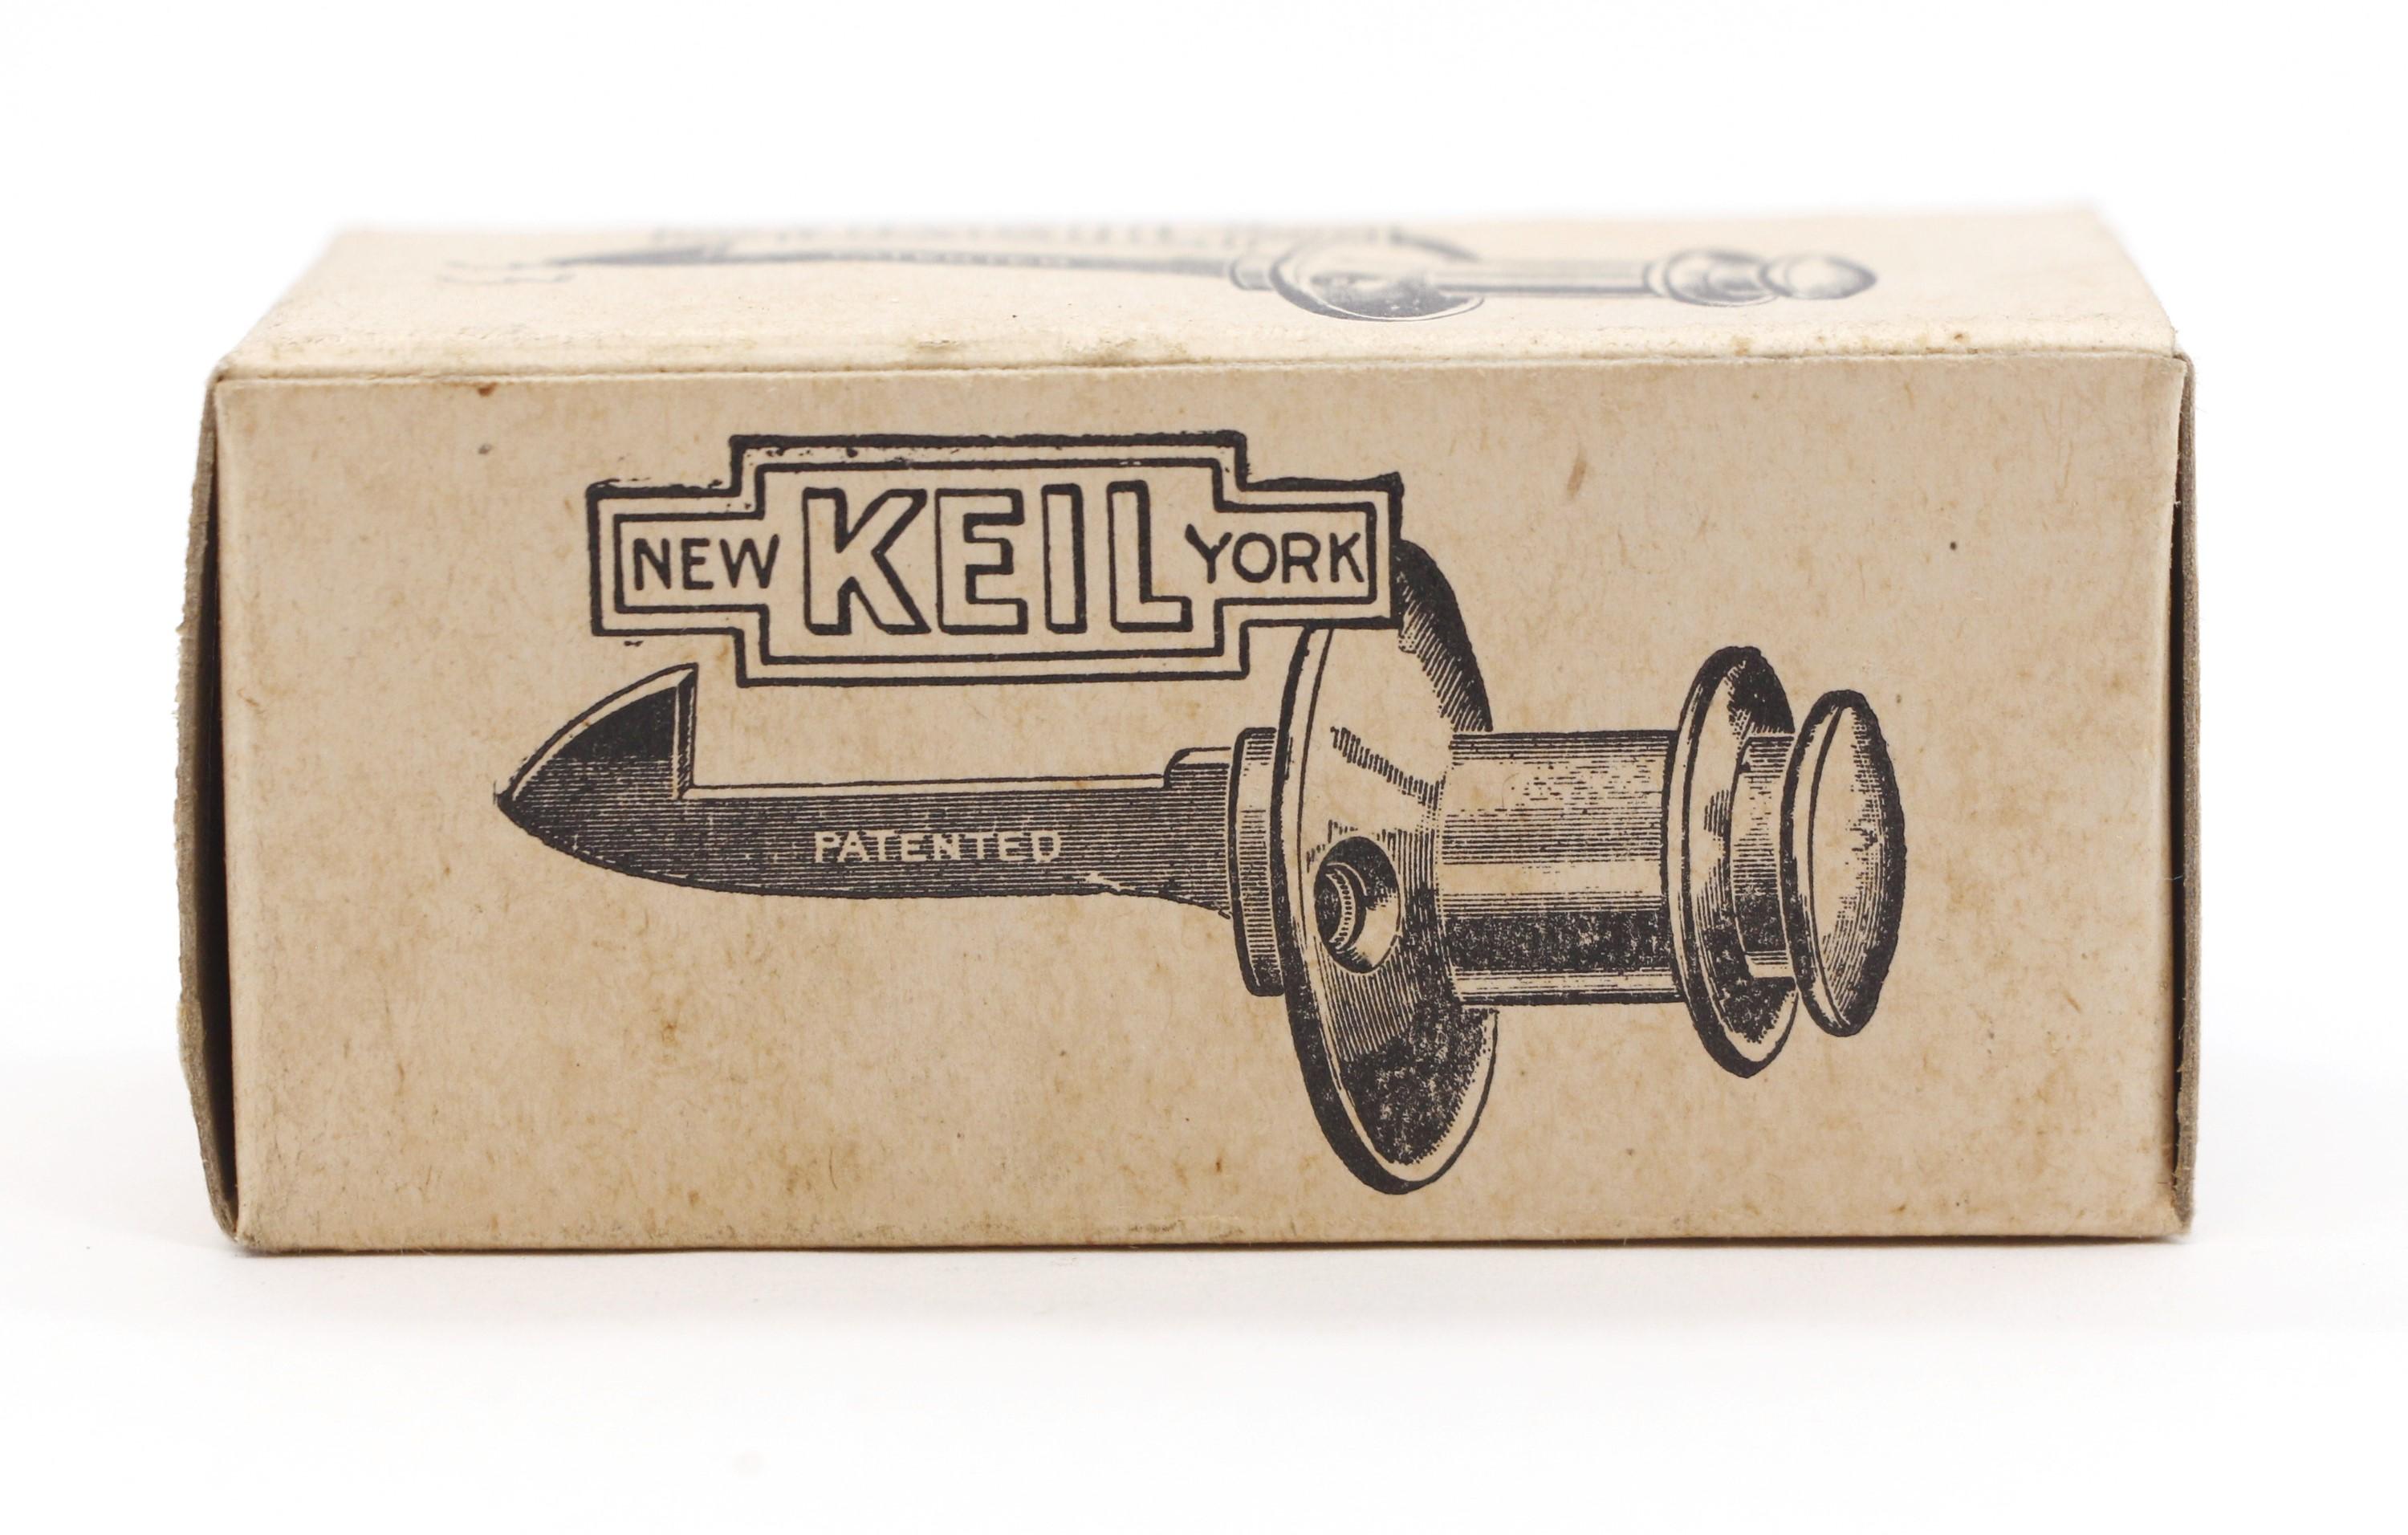 Cabinet push button catch knobs made of nickel plated steel. Made by Keil of New York. Style One L 400. Condition is old new stock in original box. Large quantity is available at time of posting. Please inquire. Priced each. Please note, this item